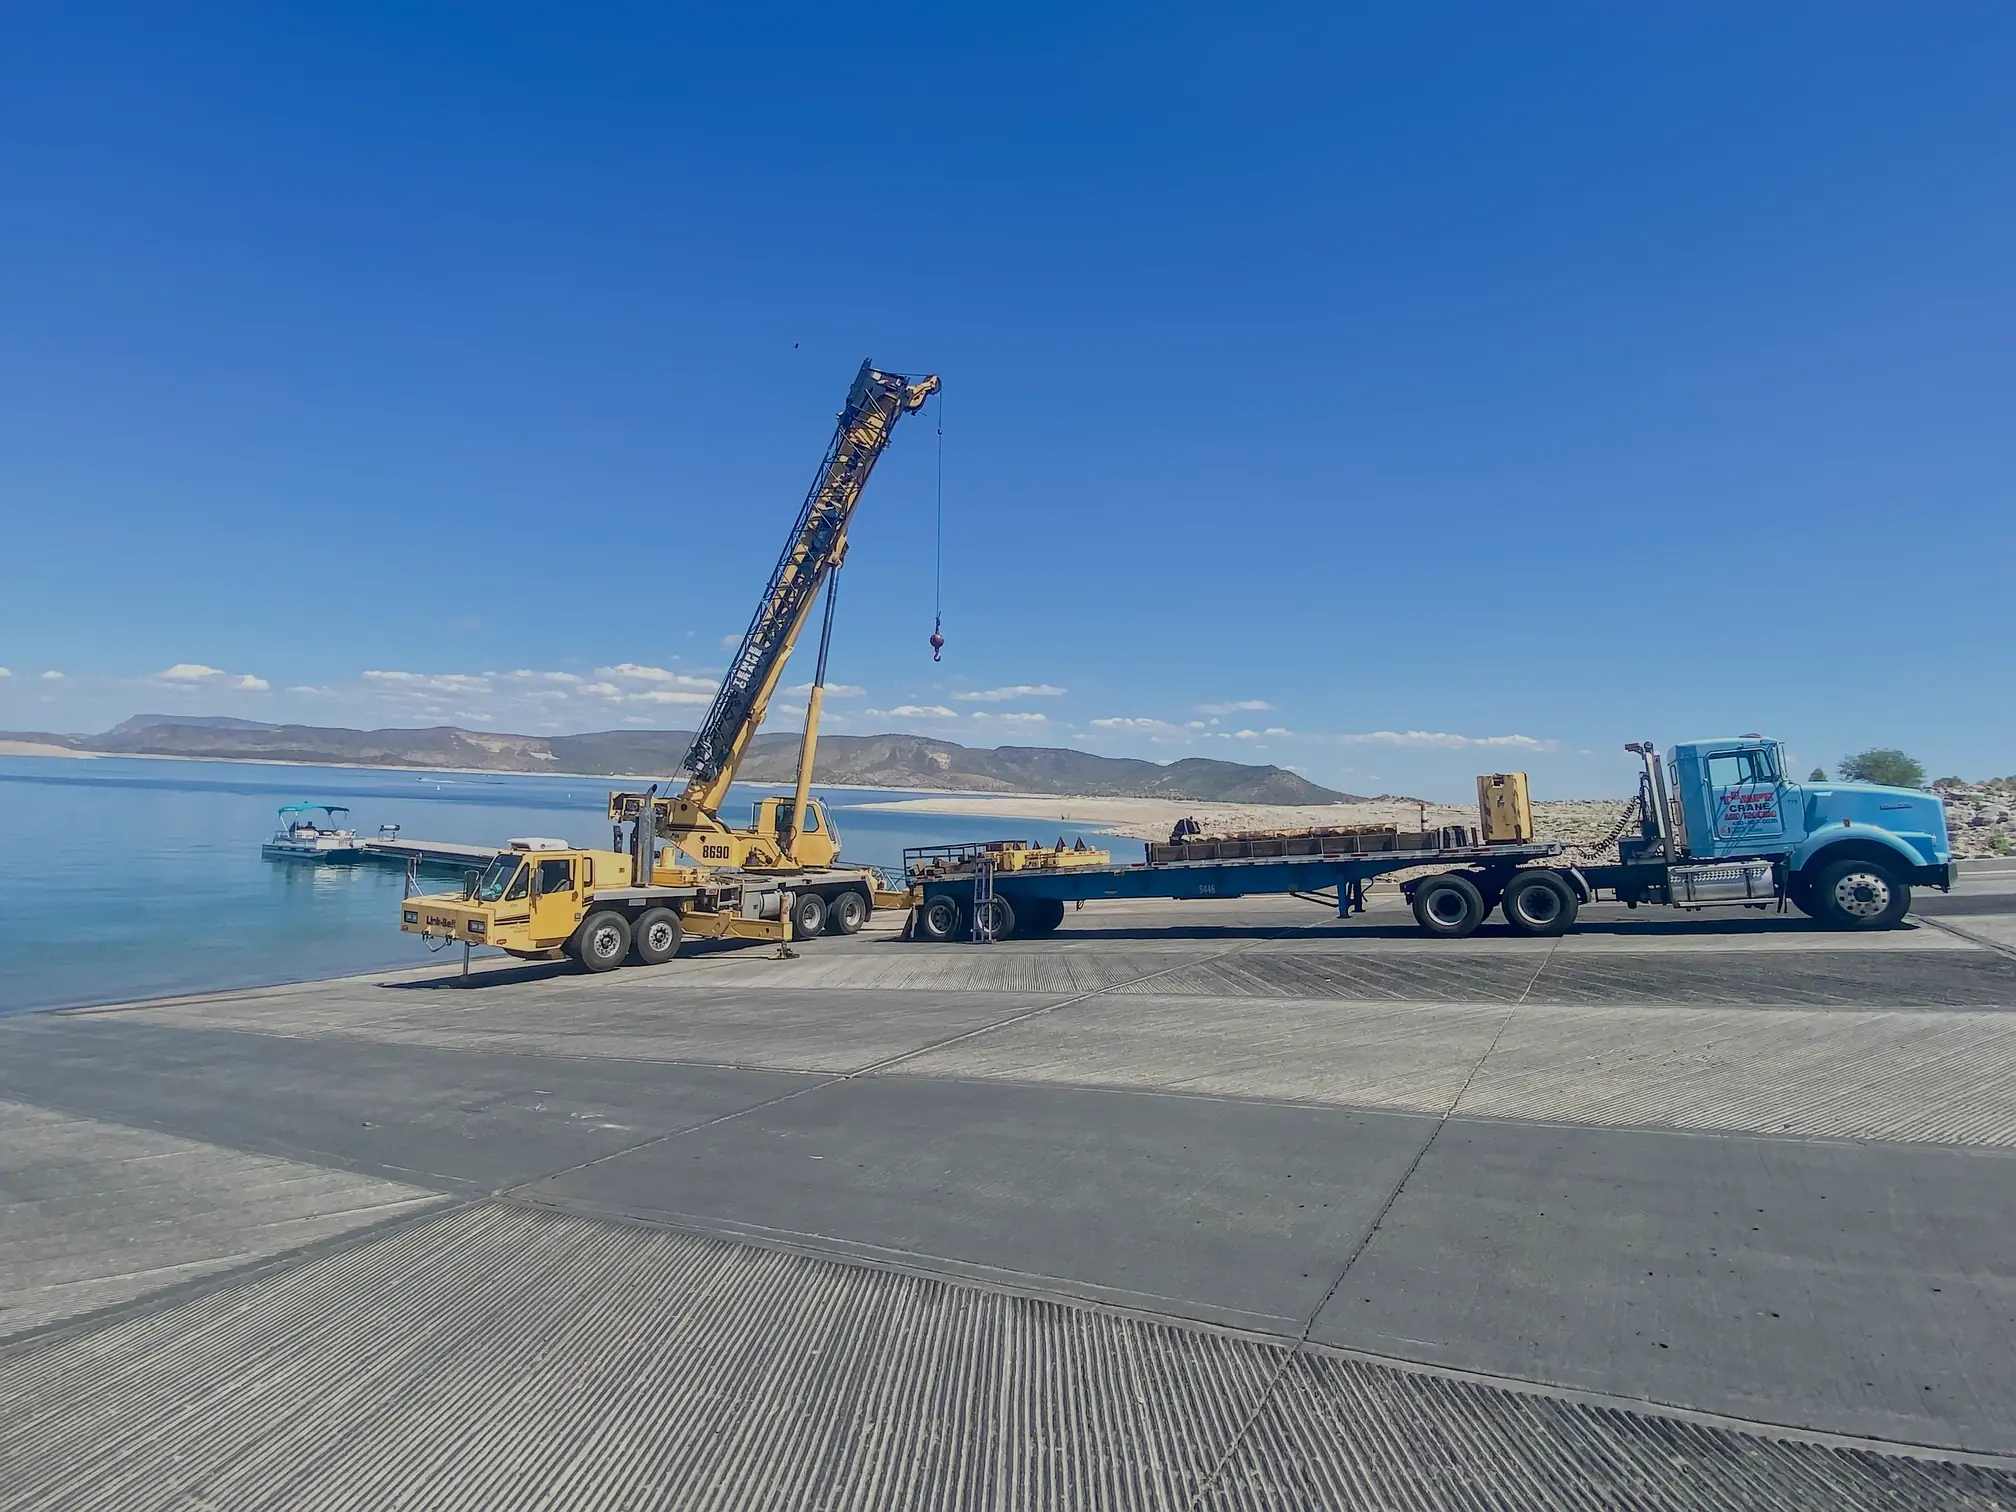 A crane prepared at a boat ramp, ready to assist in a boat recovery operation, demonstrating our versatility in marine services.